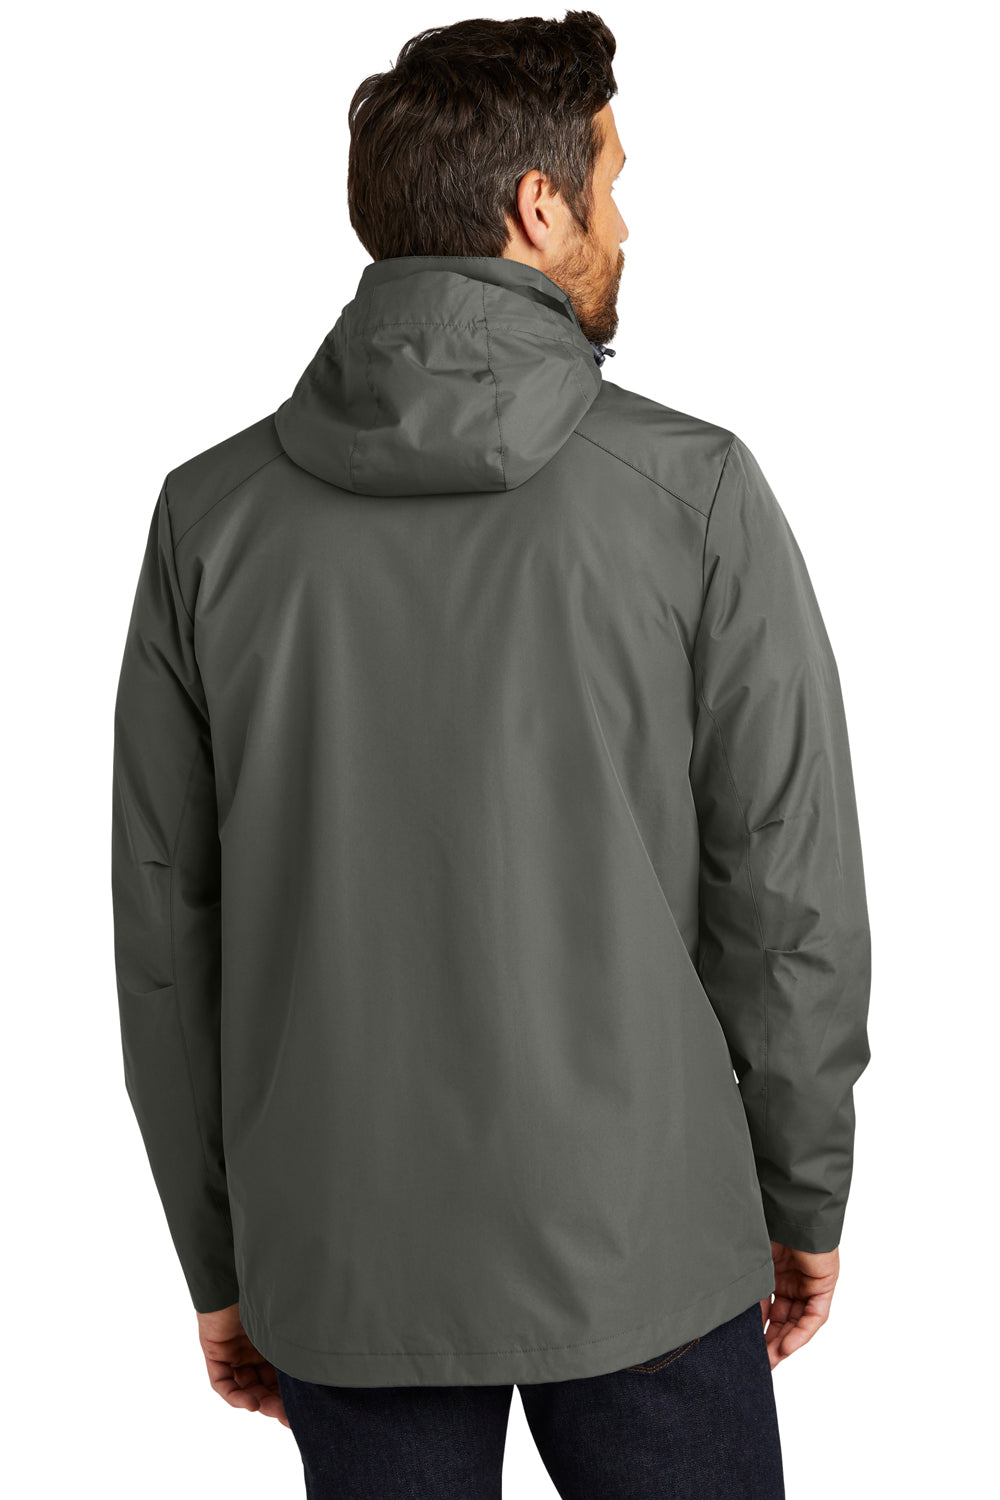 Port Authority J123 Mens All Weather 3 in 1 Full Zip Hooded Jacket Storm Grey Back